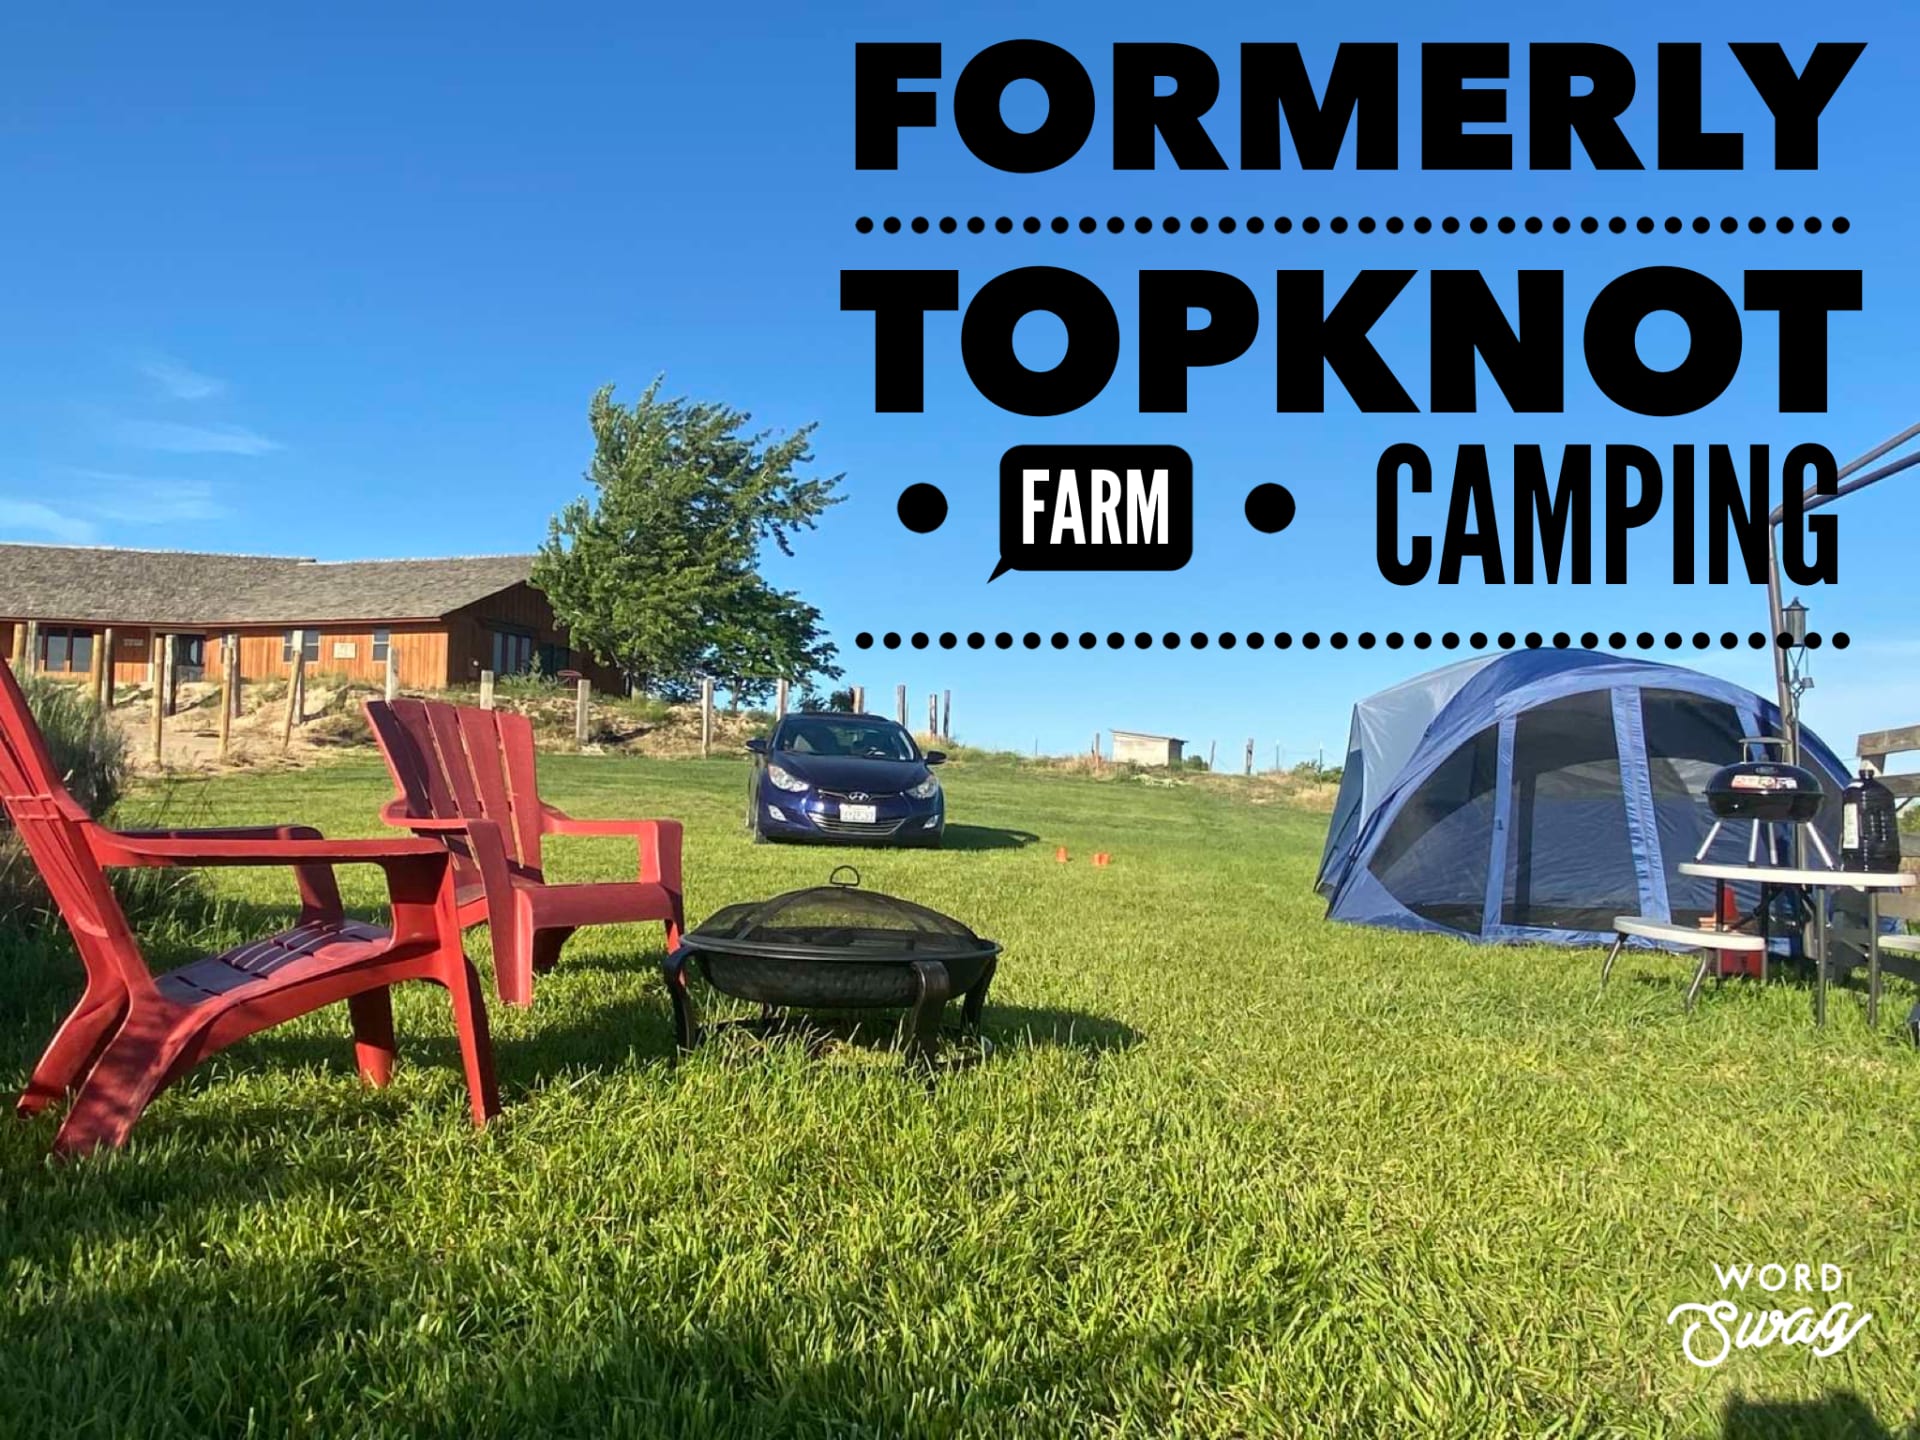 Topknot Farm Camping is now (Idaho) Pioneer Farms Camping!